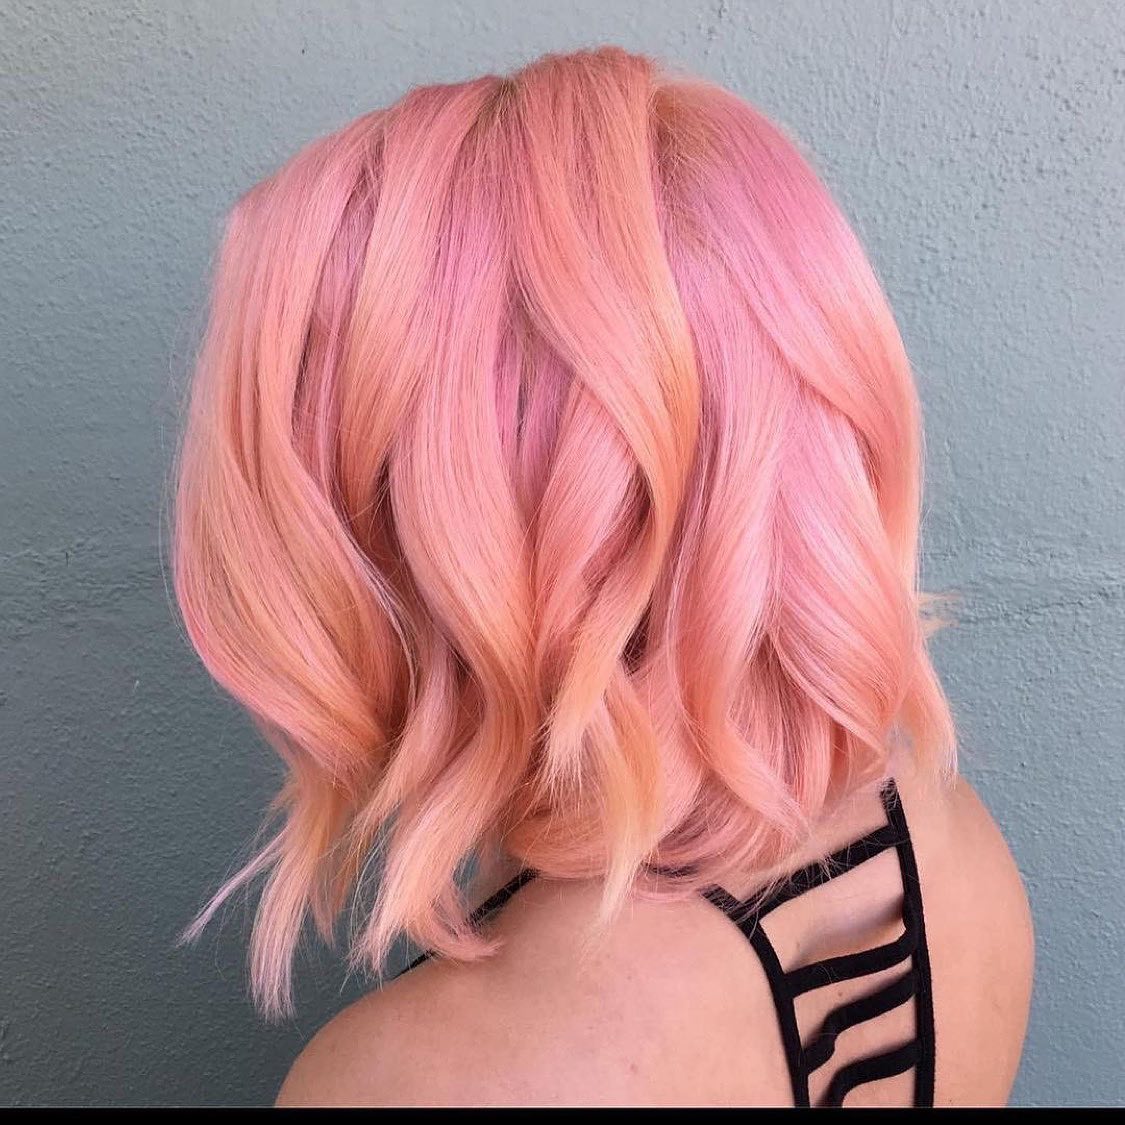 Pink hair is a great way to brighten up your look (+35 photos)